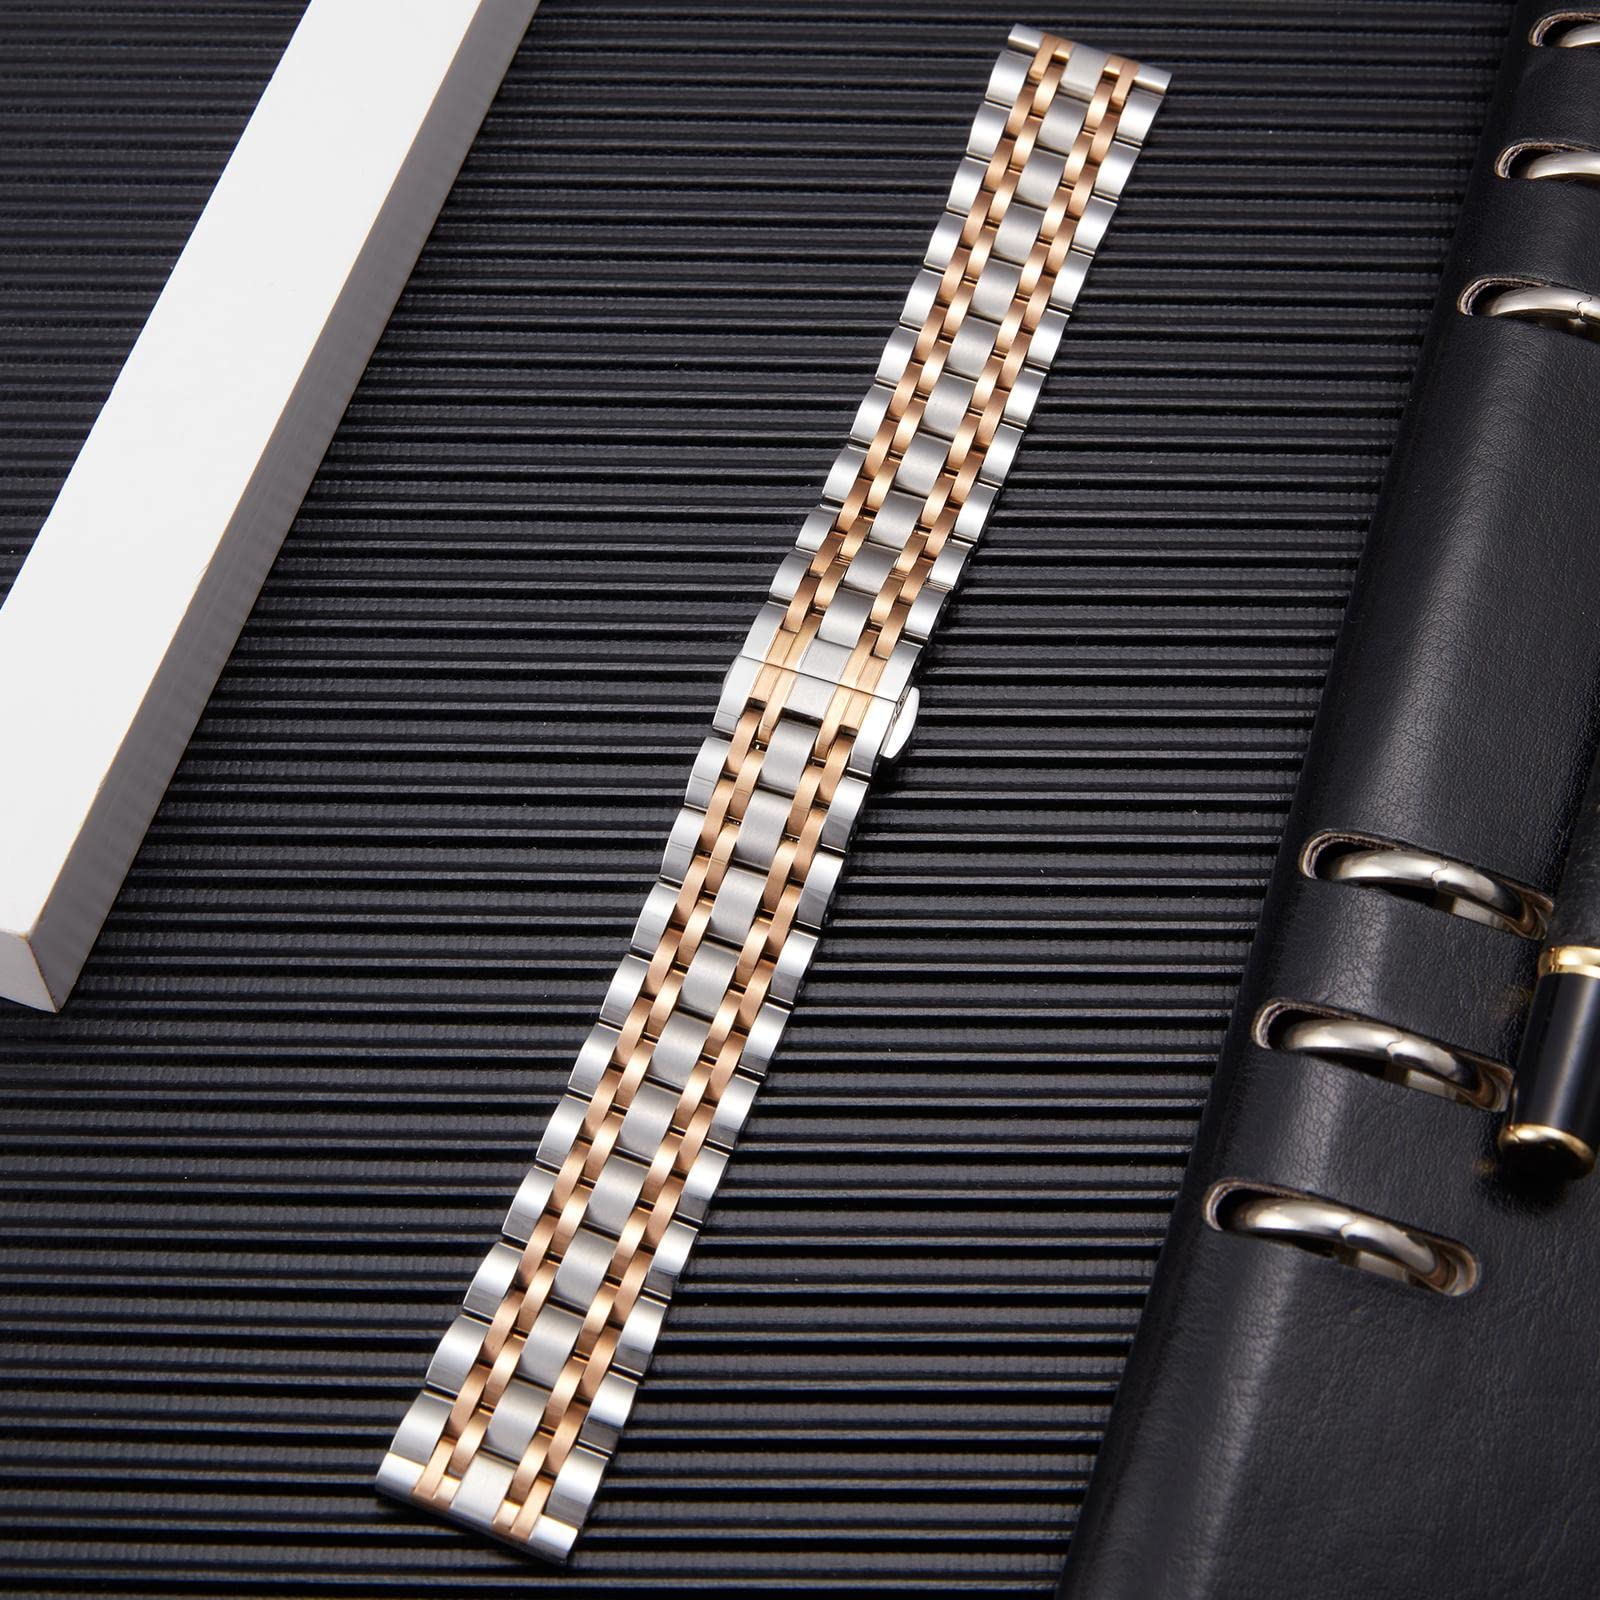 BINLUN Stainless Steel Watch Band High-end Replacement Watch Band 6 Color for Women Men(Gold, Silver, Black, Rose Gold, Gold Tone, Rose Gold Tone) 13 Size (12mm - 24mm)